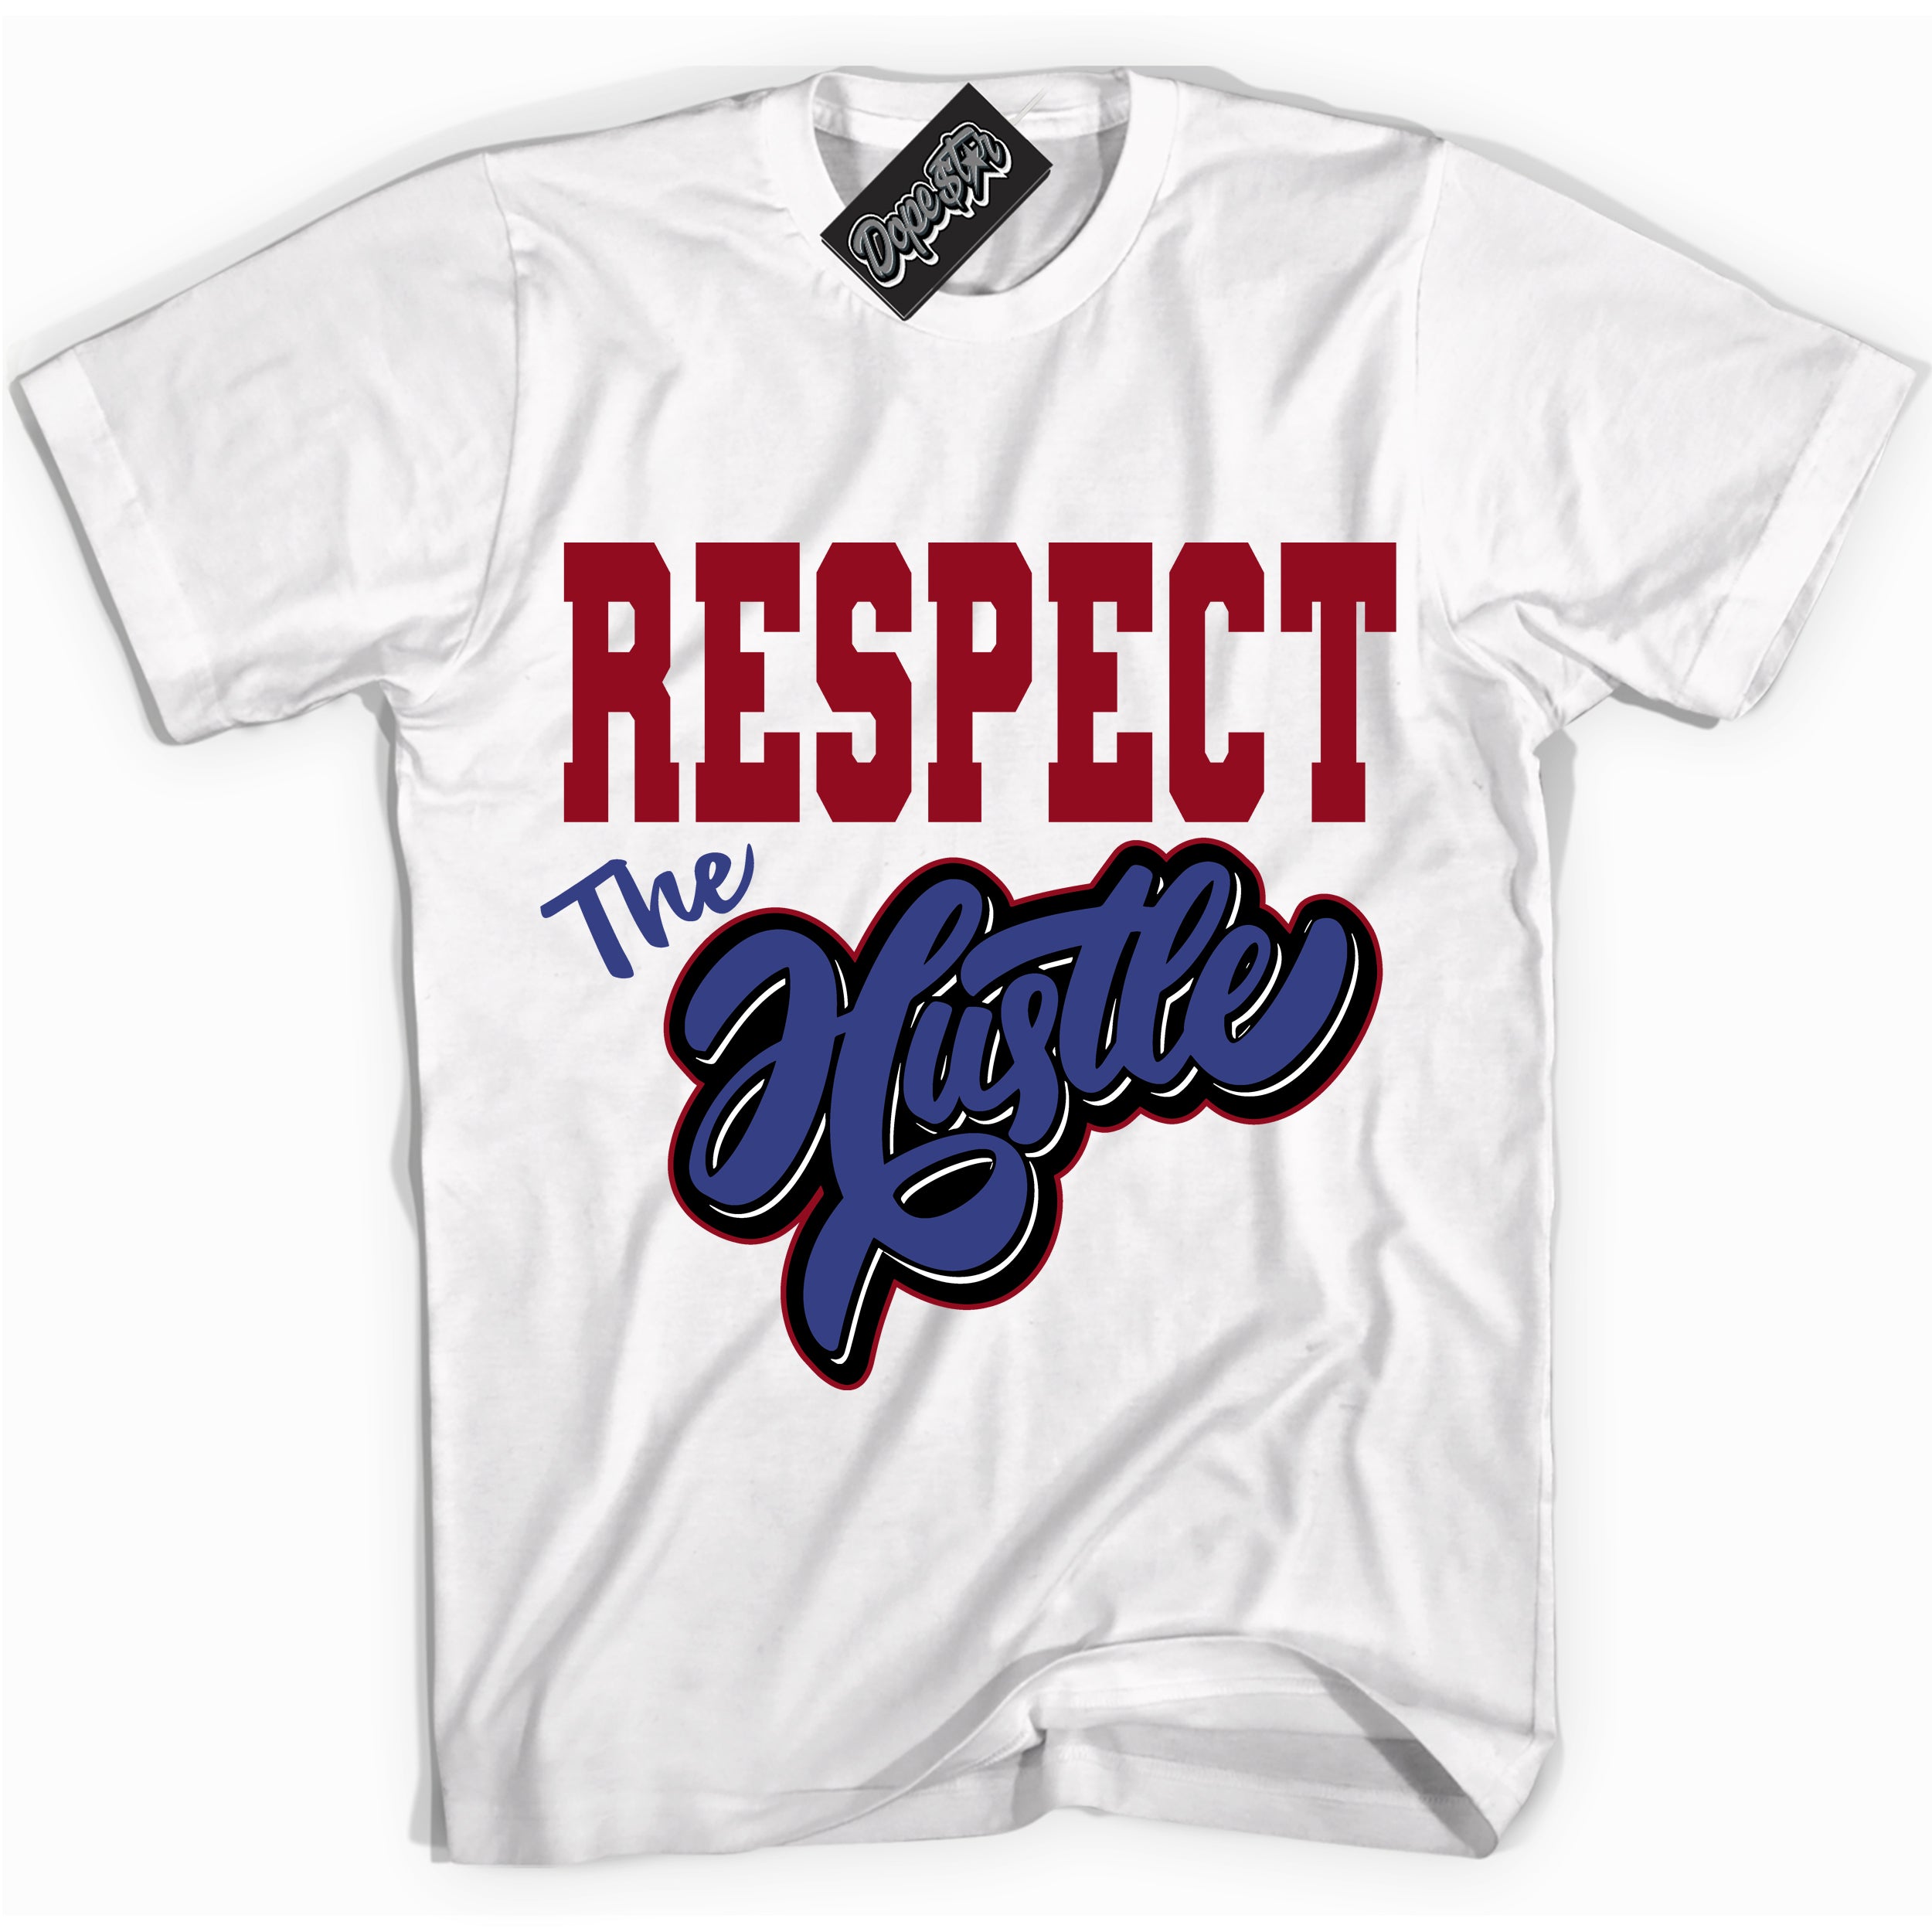 Cool White Shirt with “ Respect The Hustle ” design that perfectly matches Playoffs 8s Sneakers.